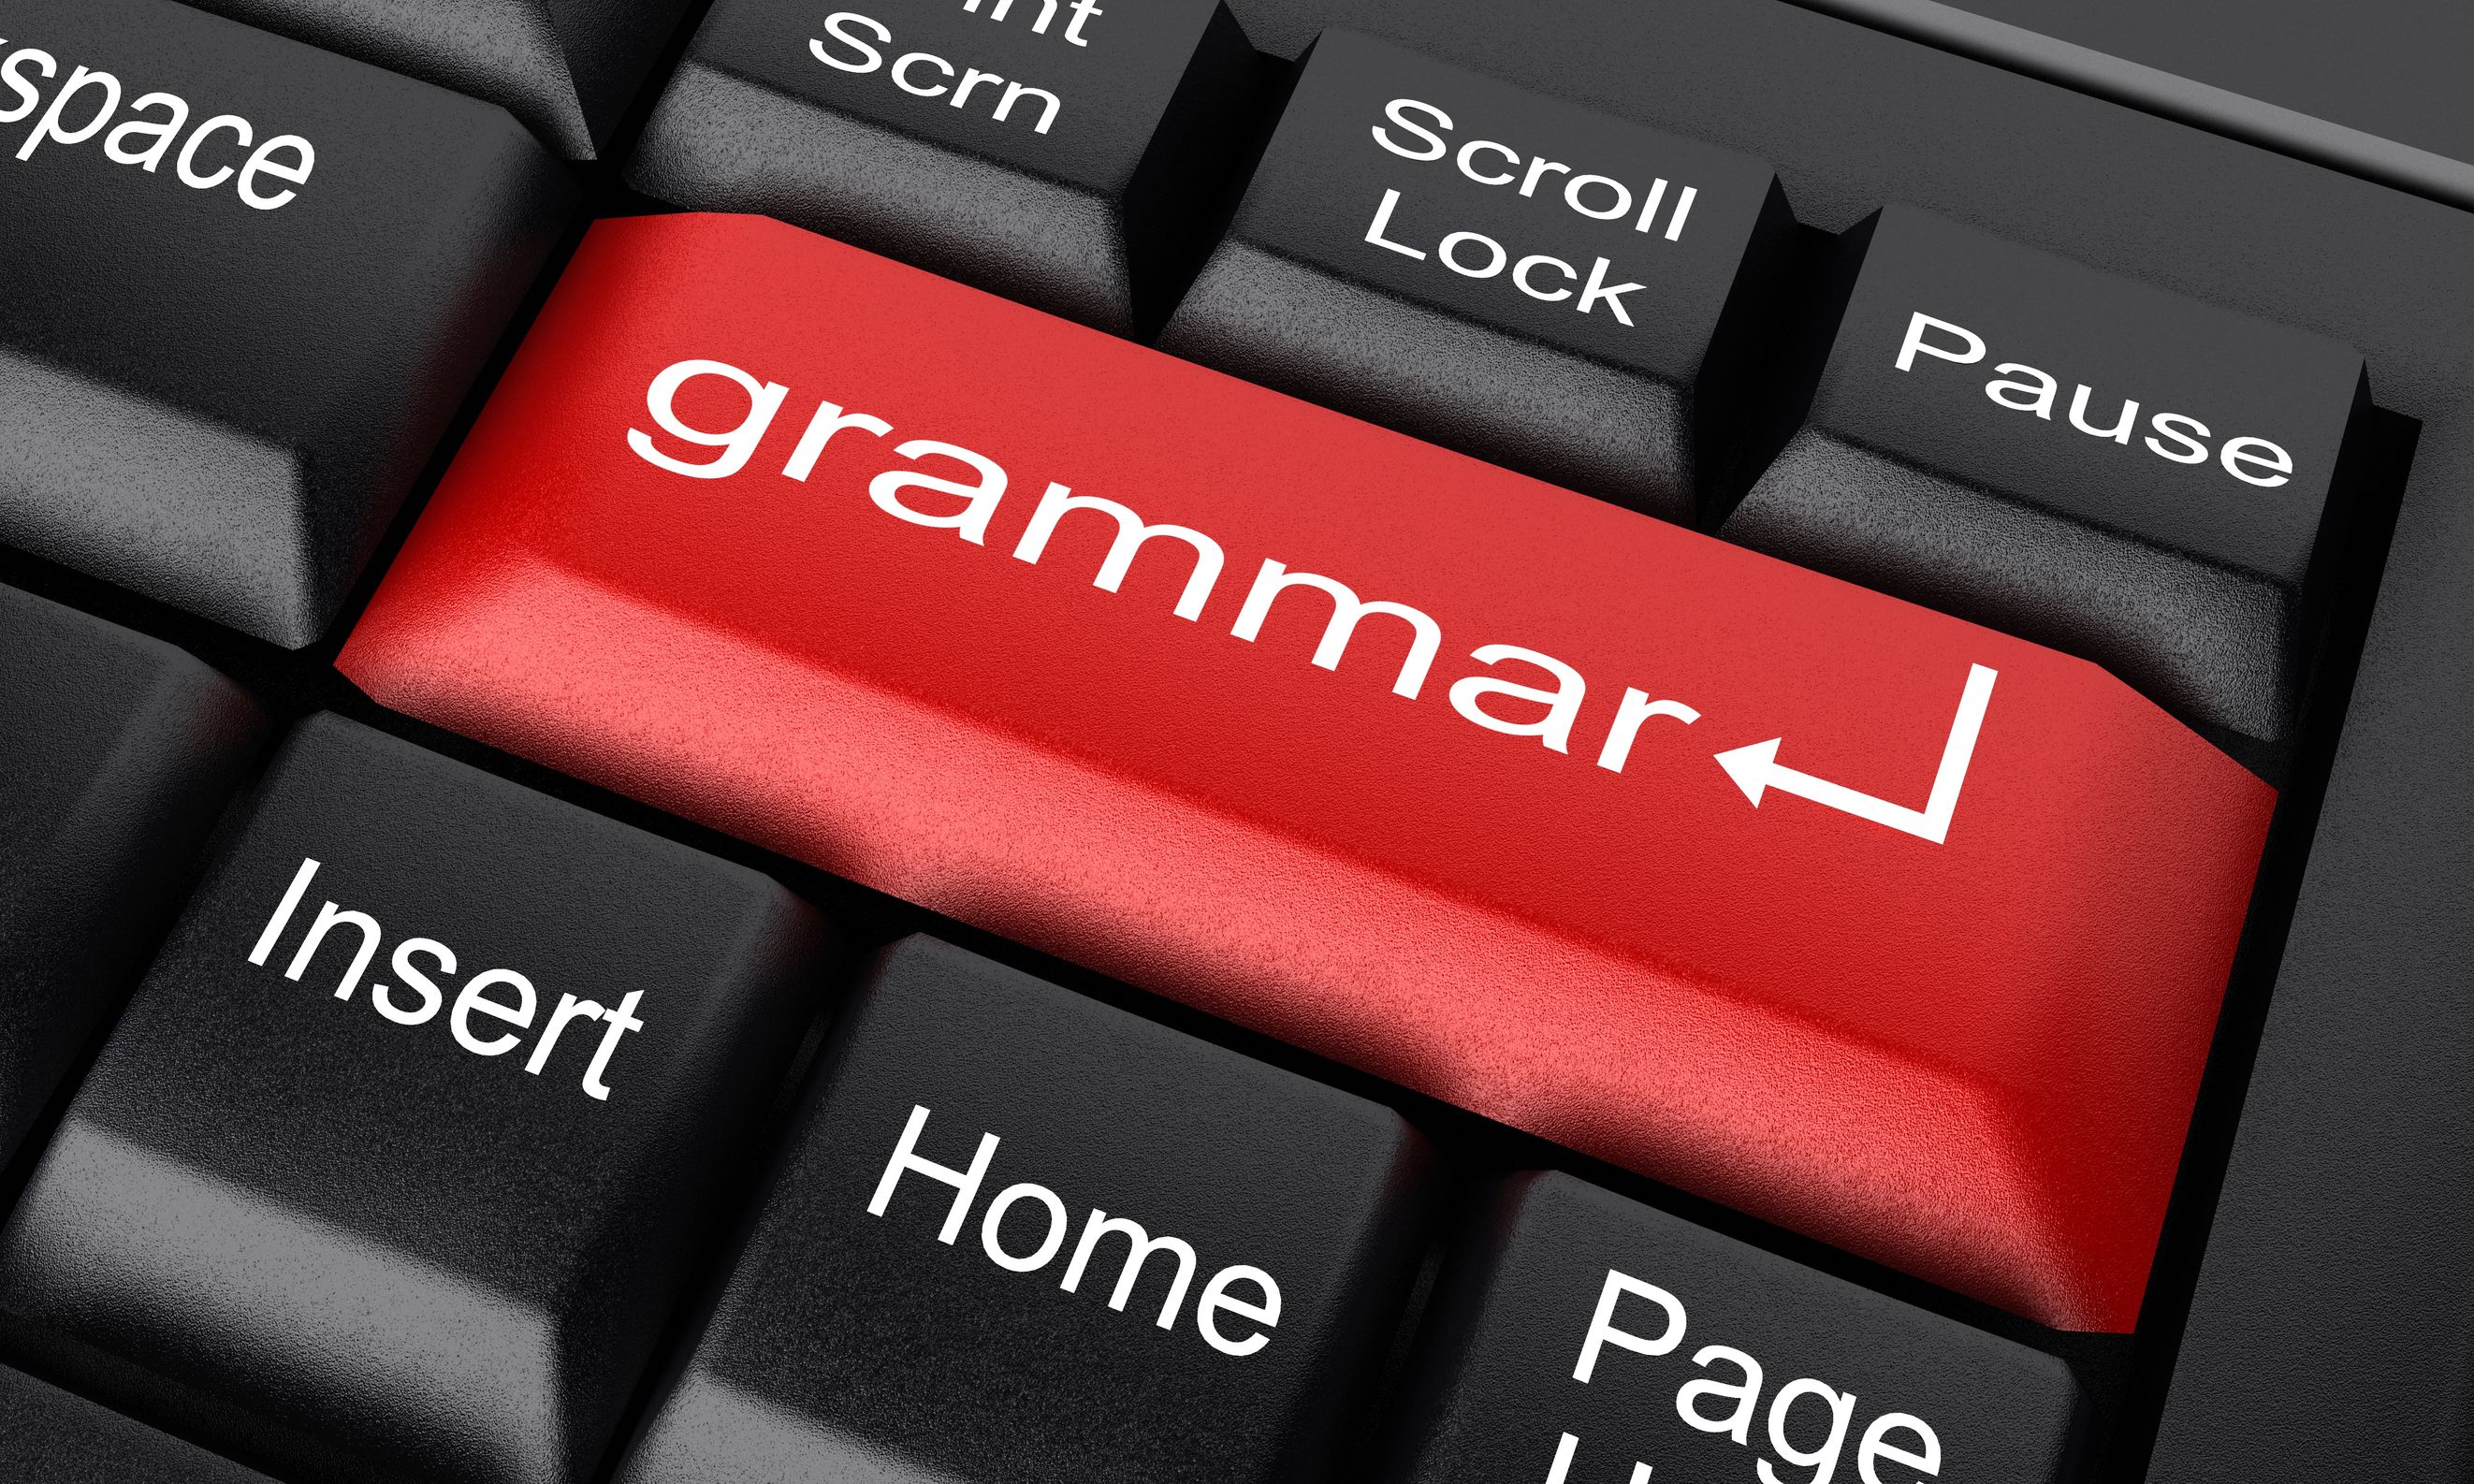 grammar-check-article-spinner-tools-searchenginereports